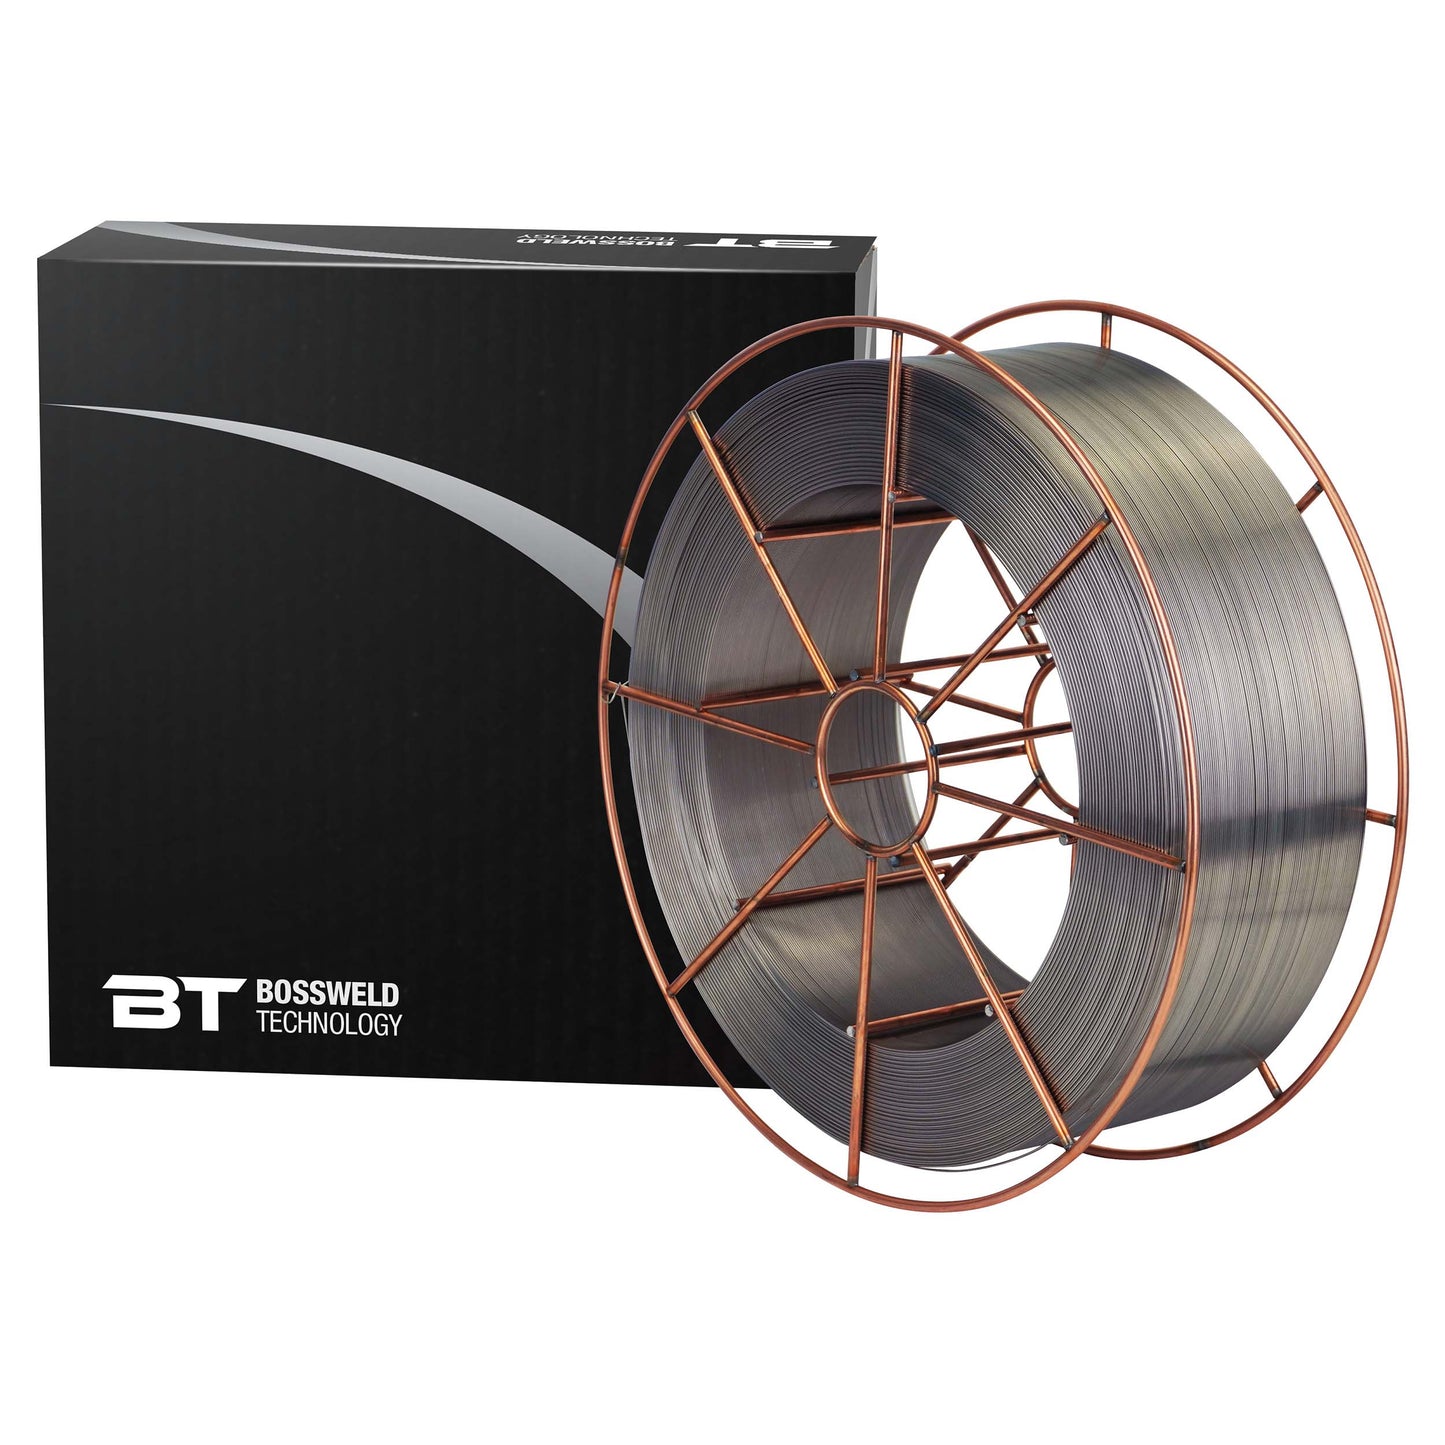 BOSSWELD TECHNOLOGY (BT) 70S-6 Copper-Free MIG Wire